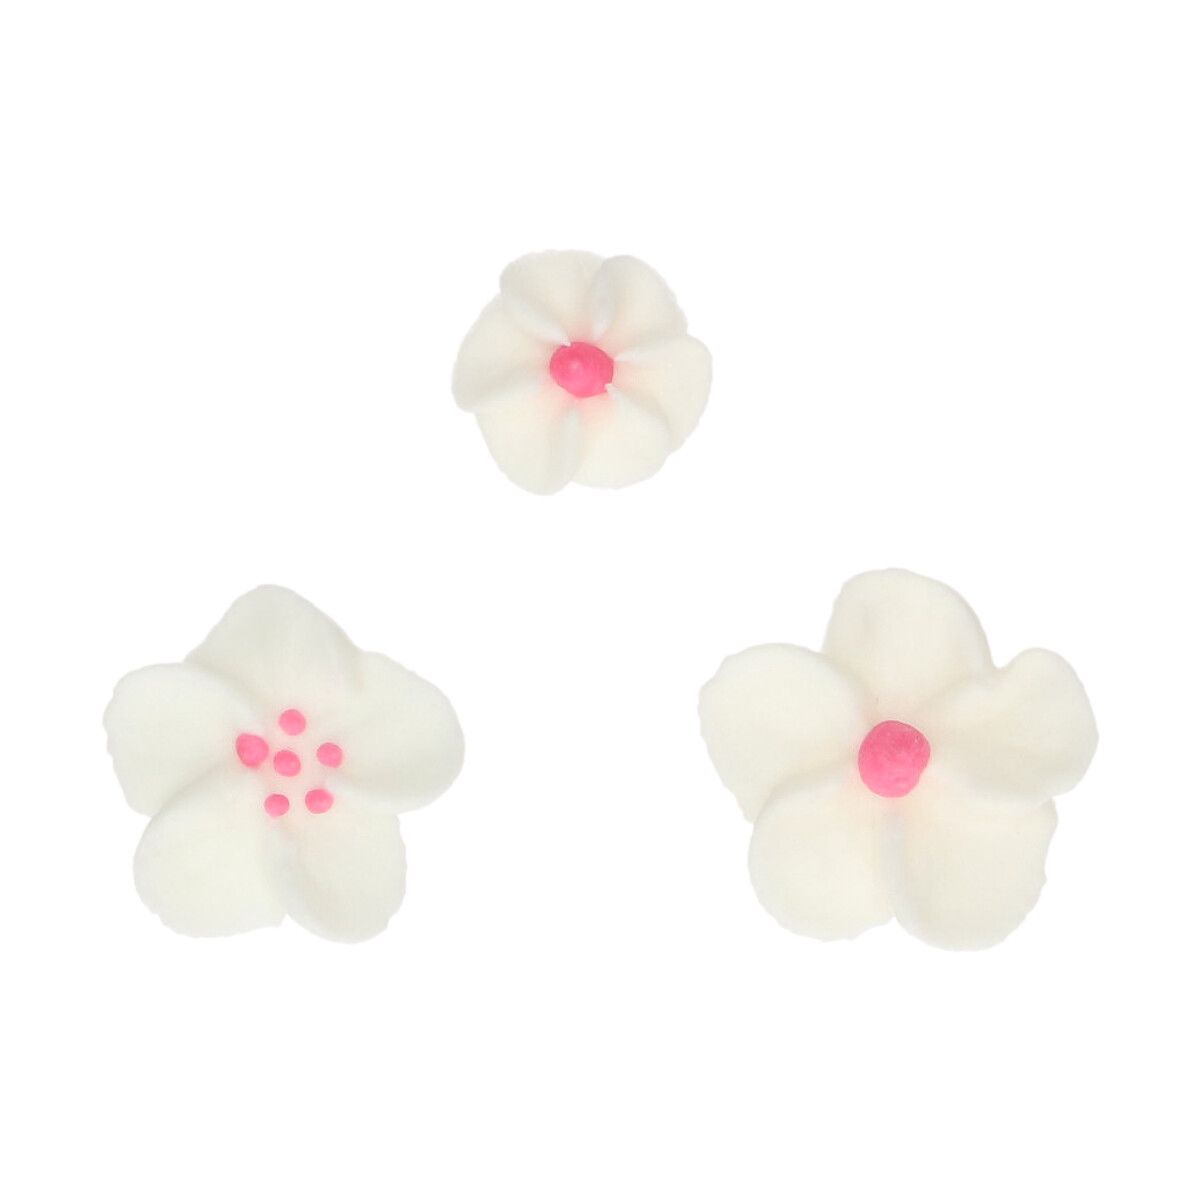 FunCakes Sugar Decorations Blossom Mix White and Pink Set/32